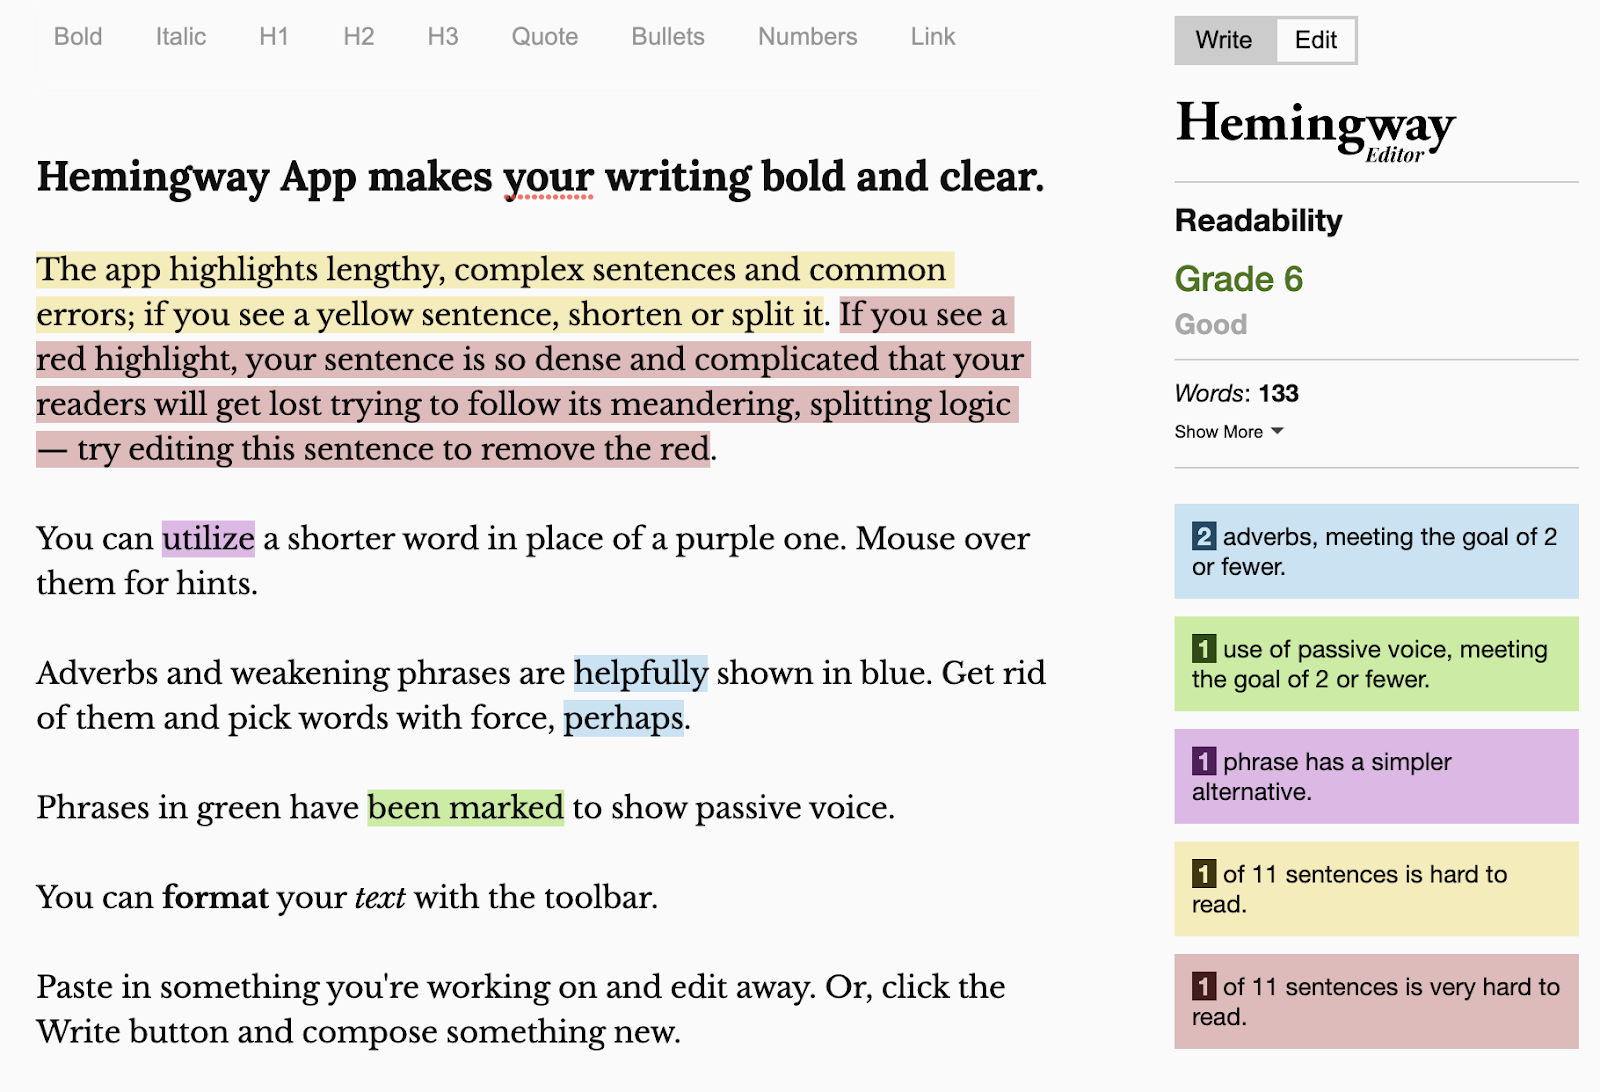 Hemingway Editor's user interface, showing suggestions on how to improve readability